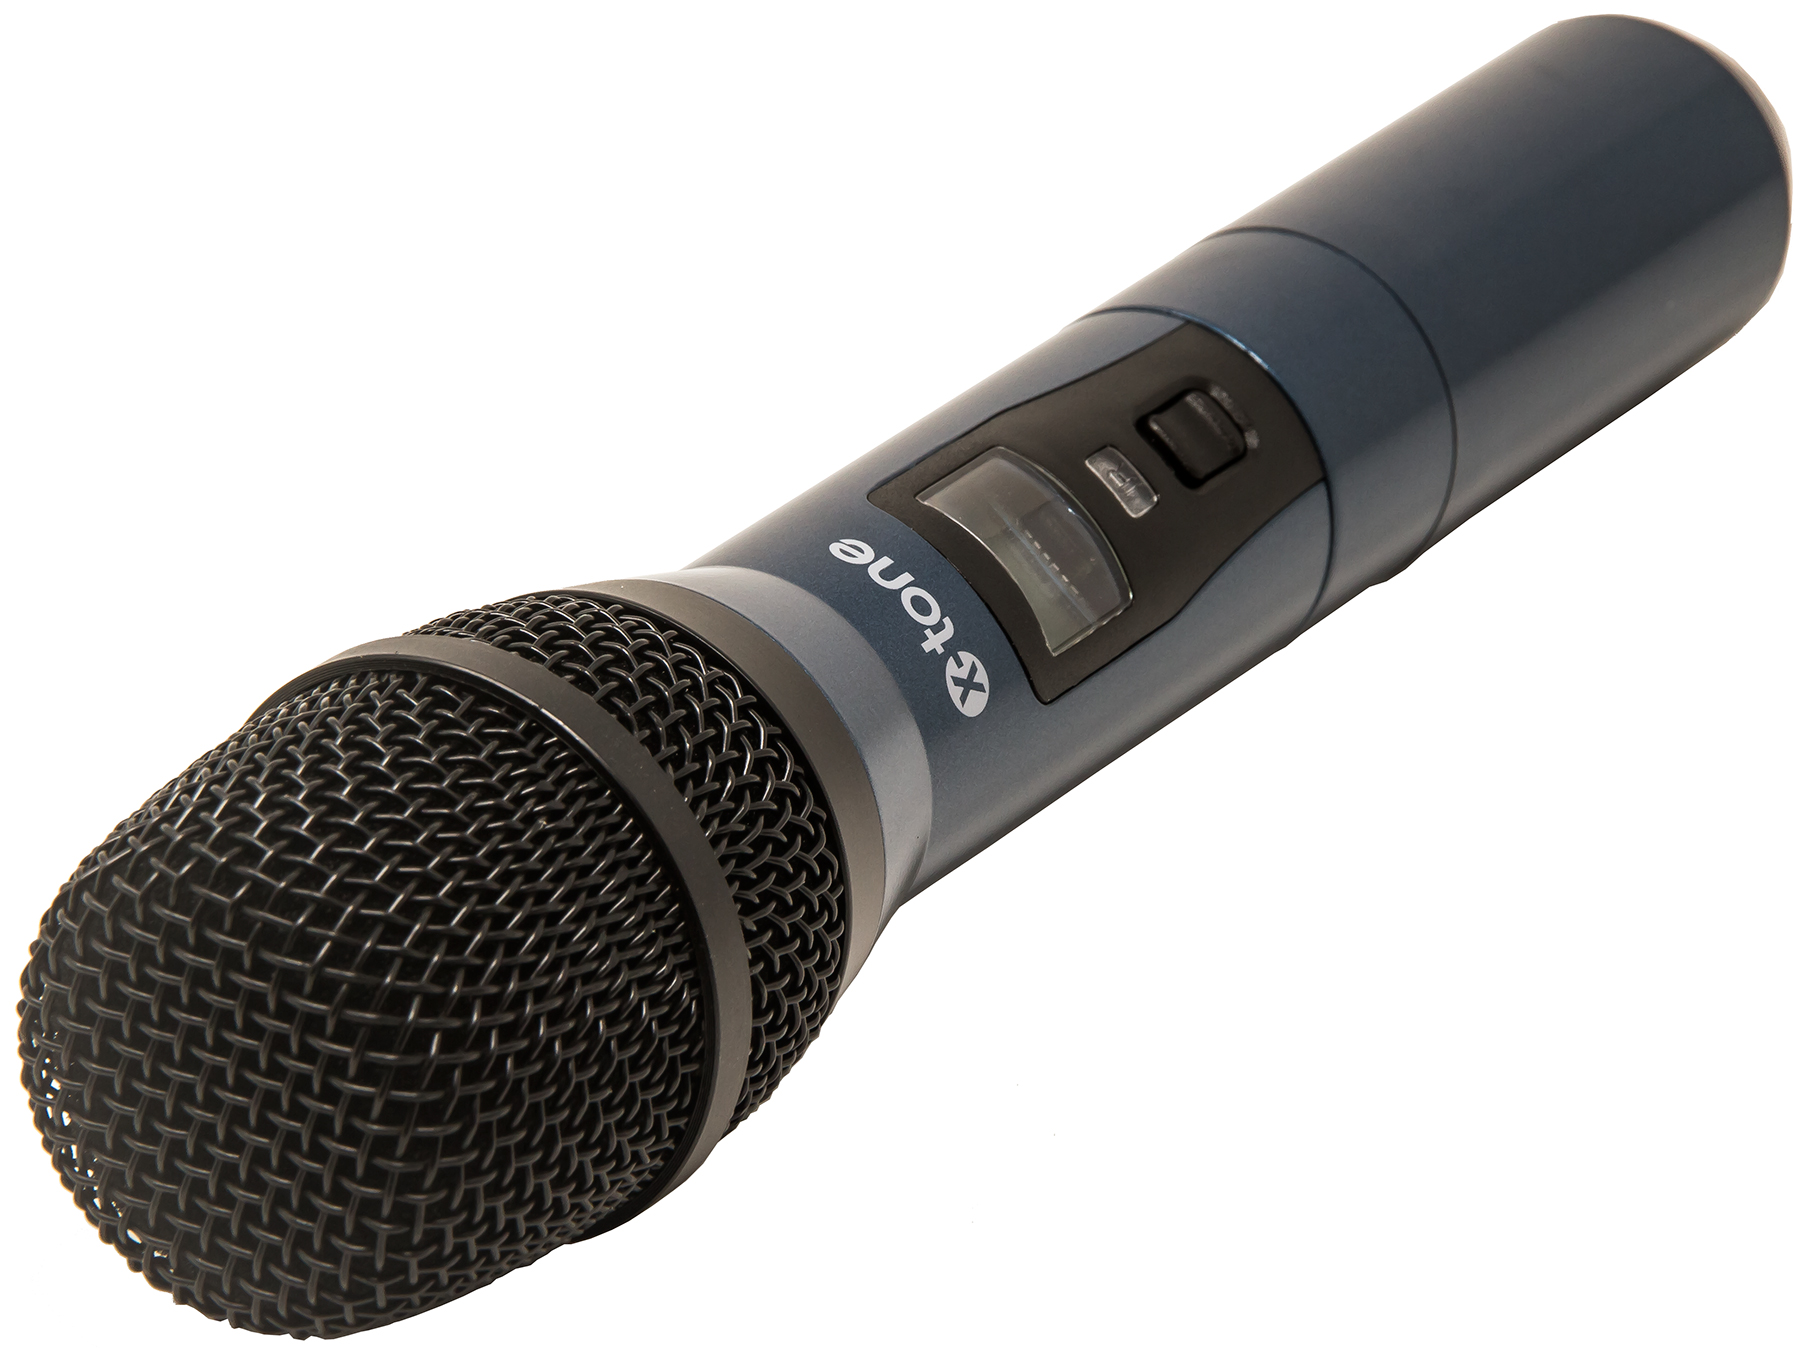 X-tone Xhf202 Systeme Hf Main Multi Frequences 2 Canaux - Wireless handheld microphone - Variation 4